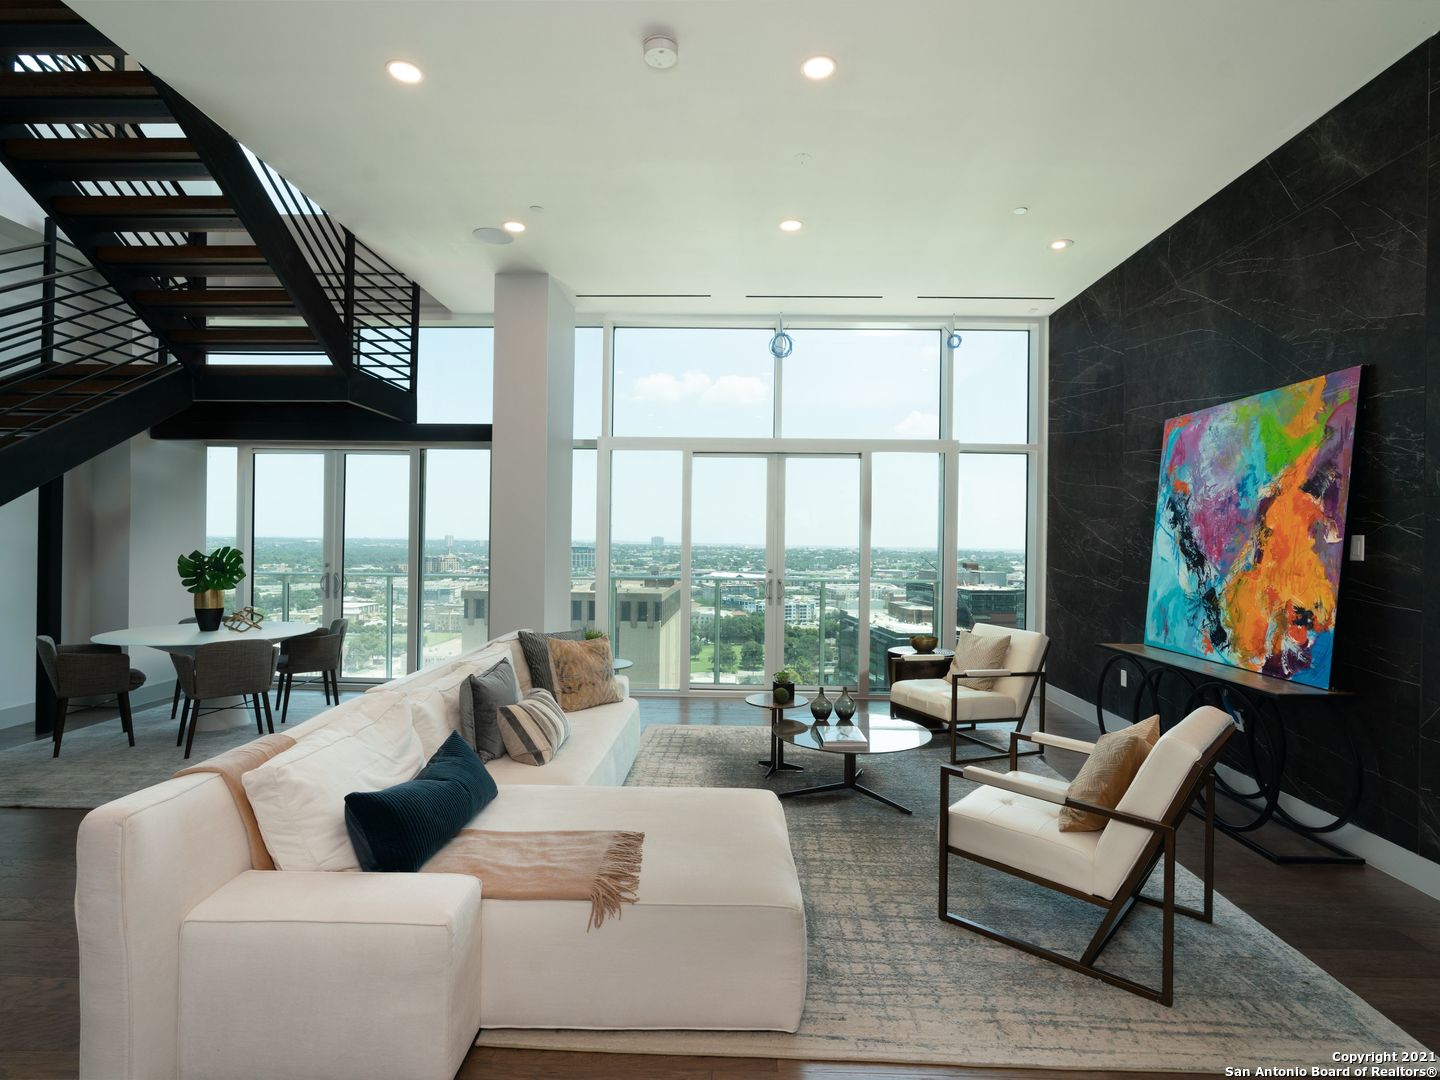 The Chopin at the Arts Residences is a two-story Penthouse with 12 ft floor-to-ceiling windows and designer finishes. This residence has an expansive living area and a wet bar for entertaining. The large walls are made to showcase art. Views to the North and South provide both tranquility and downtown energy. Located above the Thompson Hotel, amenities like 24-hour concierge, valet parking, and optional housekeeping and linen service offer a low-maintenance lifestyle. The kitchen has Gagganeau appliances, Italian Pedini cabinetry, an extended porcelain backsplash to the ceiling, a walk-in pantry, abundant cabinet space, a great island with porcelain countertops. Near the kitchen, there is a large area perfect for cooking prep, catering staff, or a great wine room. Enjoy amazing views while cooking, or take advantage of 24-hr room service from LandRace, run by James Beard Award finalist Steve McHugh of Cured. The bedrooms are located off of a long hallway that is another great opportunity for an art gallery. The primary suite has downtown views and two separate baths with heated floors, a large jacuzzi tub, a Toto toilet, and generous closets. A sitting area with sliding glass doors offers fresh air while you enjoy morning coffee or cocktails to watch the city light up. There are two spacious guest rooms, both with ensuite bathrooms and amazing closets. A study separates the two guest bedrooms and would make a great movie theater, meditation room, or cozy library. Another flex space at the end of the hallway with direct downtown views and a full bath could be used for a Peloton, art studio, or even as space for a live-in. Downstairs would make a breathtaking entryway with space for a piano, or a second living area with sliding doors that open to enjoy a cigar or fresh air. This residence comes with a private, enclosed 3-car-garage and is wired for speakers, smart home technology, and electric shades throughout. Residents have full access to the Thompson pool with cabanas, bar, and cafe. The hotel spa has a steam room and sauna and offers in-home massages. Other services available include dog walking, car detailing, personal shopping, housekeeping, linen service, and dry cleaning. While LandRace offers riverside seating downstairs, The Moon's Daughters has rooftop dining and cocktails upstairs. Located on a quiet part of the river next to The Tobin Center for the Performing Arts, residents enjoy preferred access and ticket purchases to all shows at The Tobin. Come experience The Art of Living Beautifully.